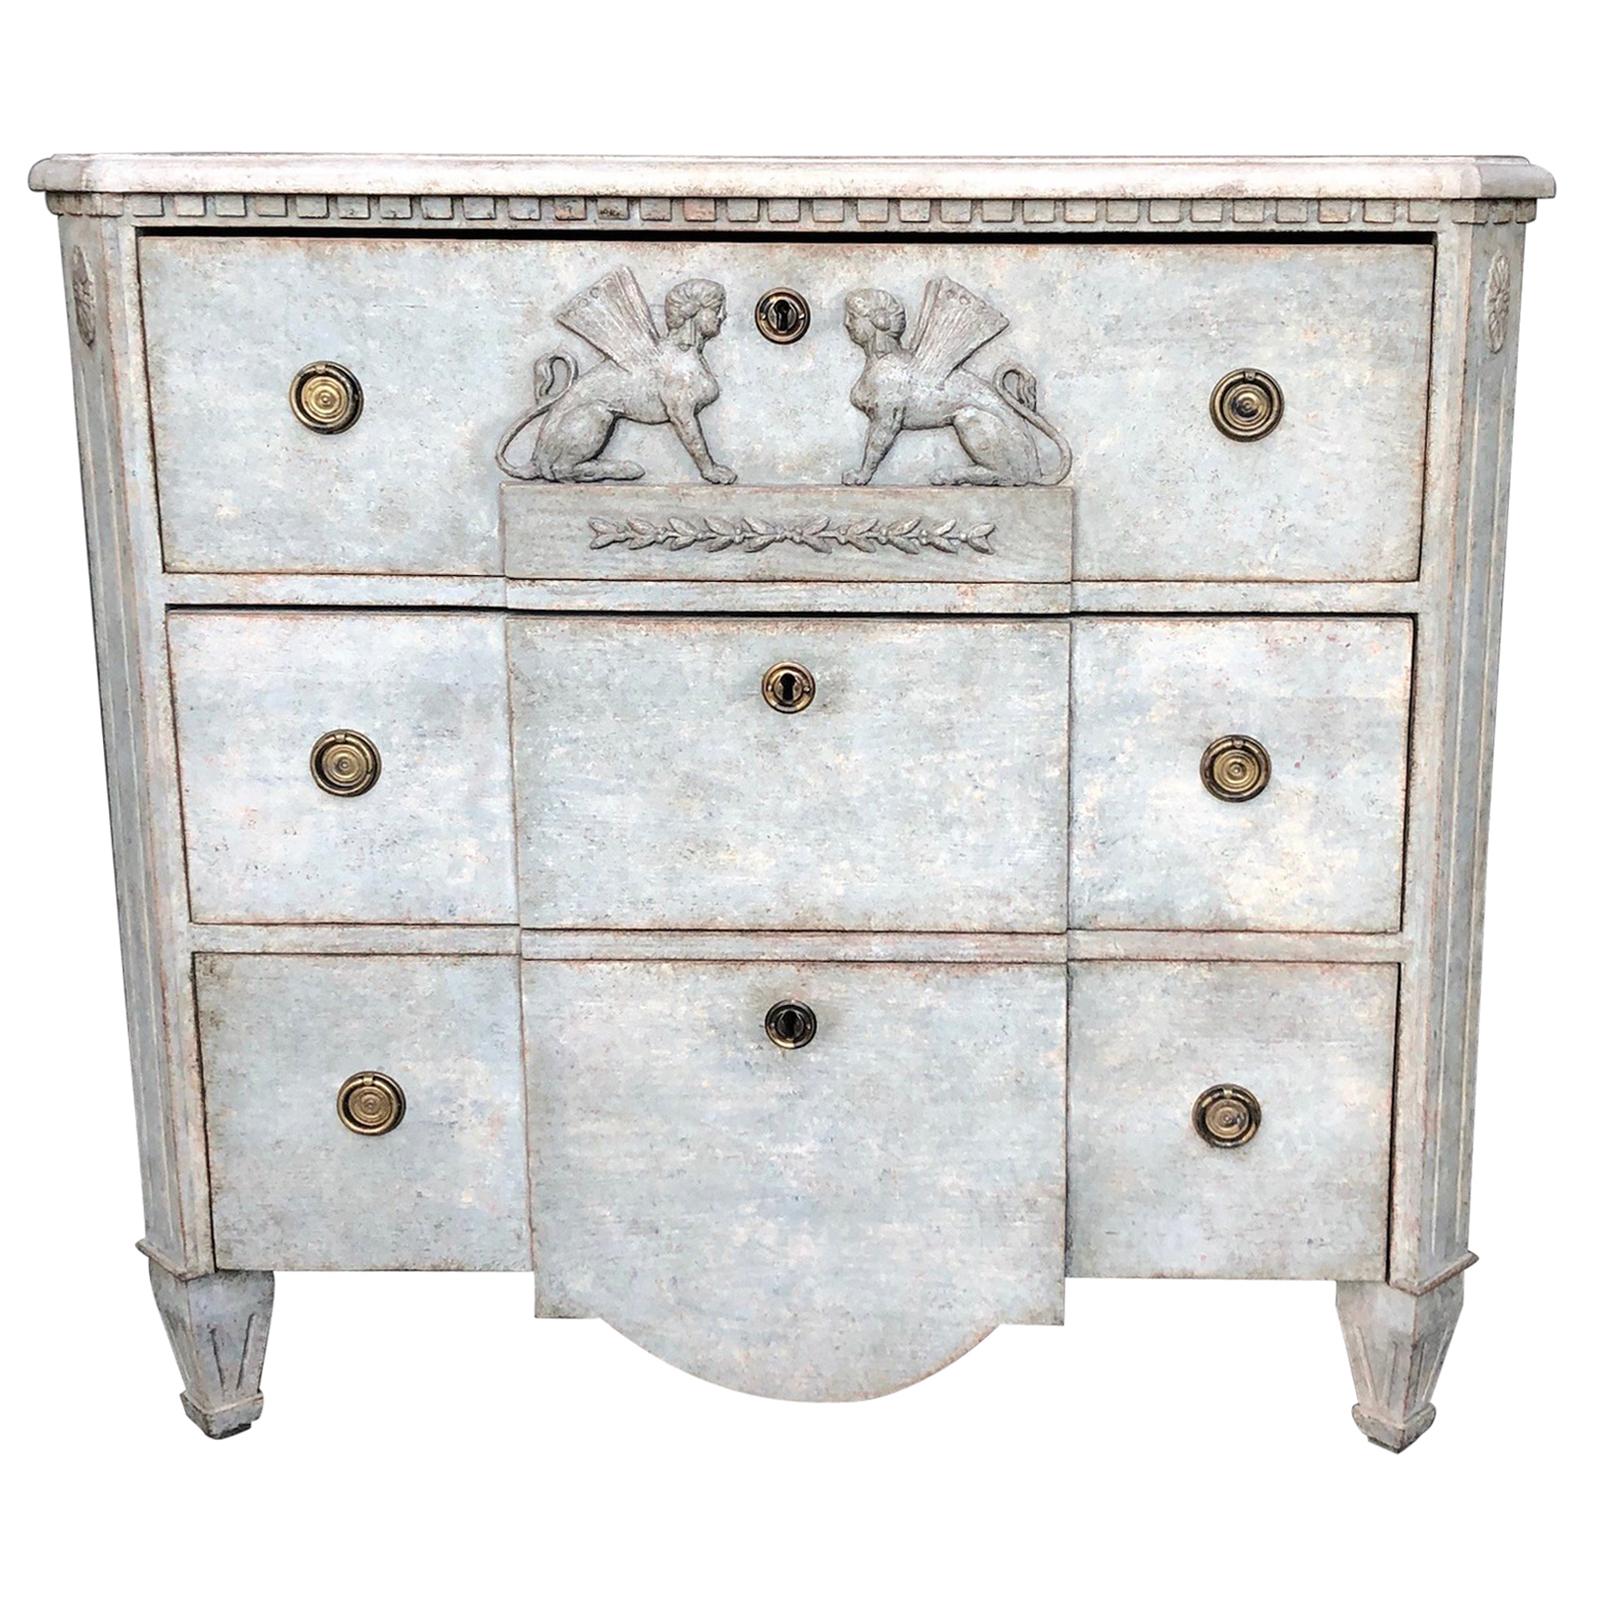 Antique Swedish Neoclassical Chest of Drawers, Mid-19th Century For Sale